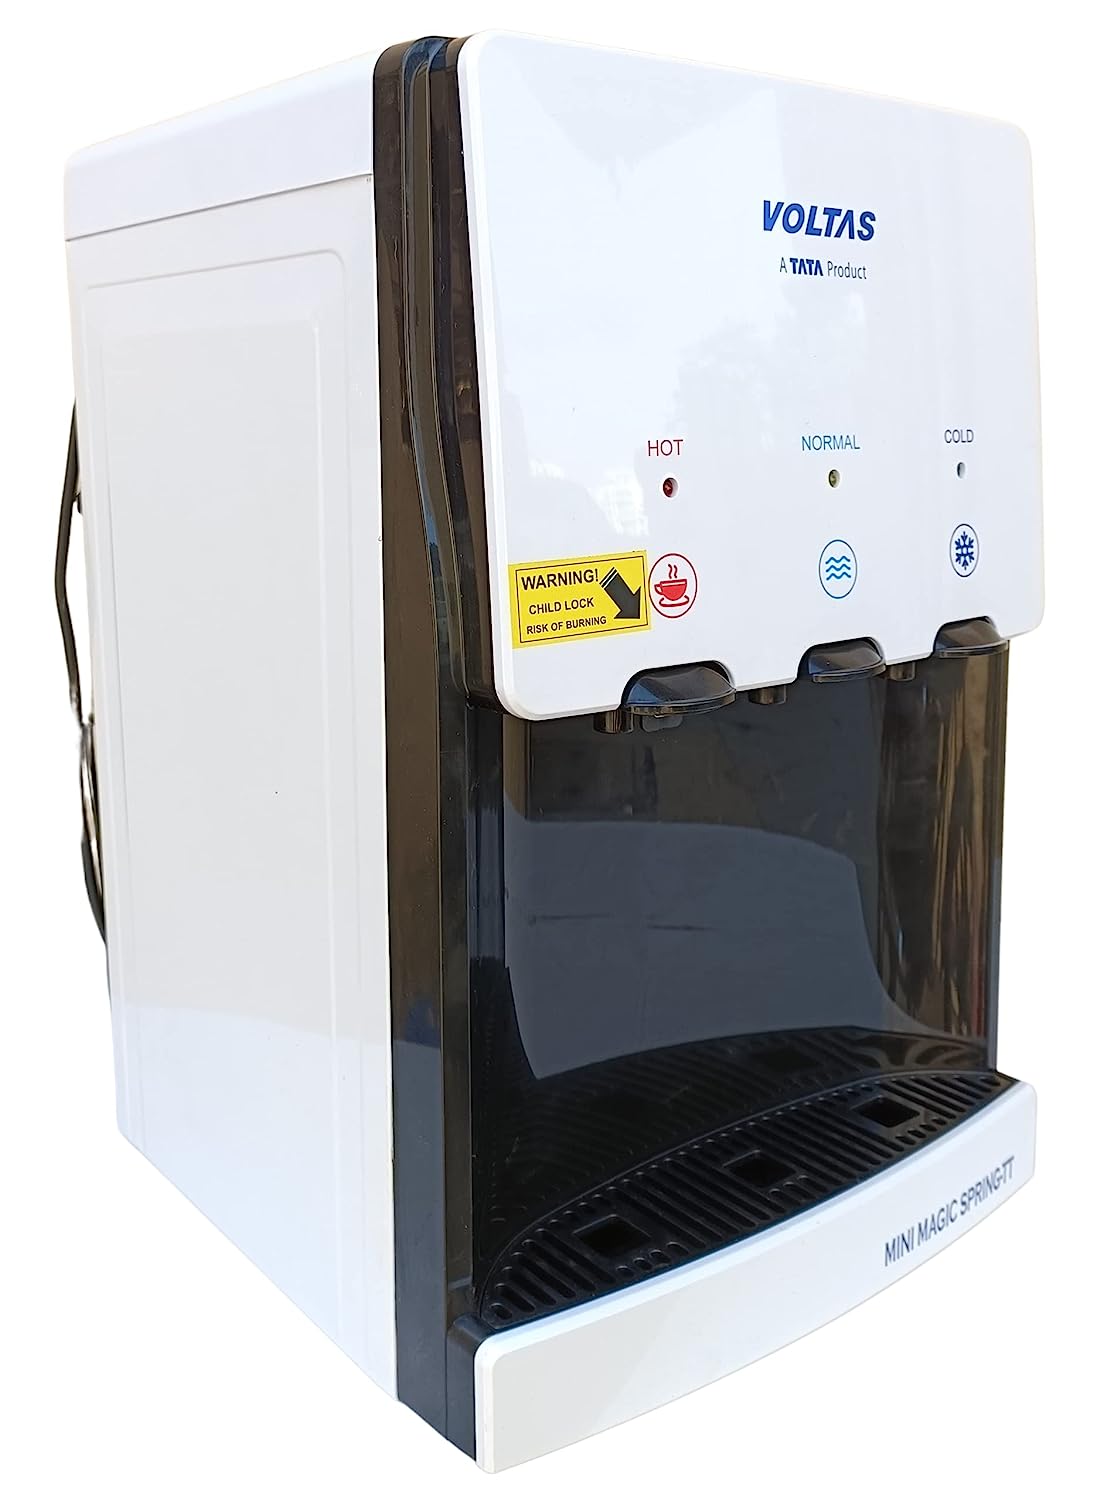 Voltas Spring TT Table Top Water Dispenser with Three Temperature Tap and Compact Design (White and Black) - Mahajan Electronics Online